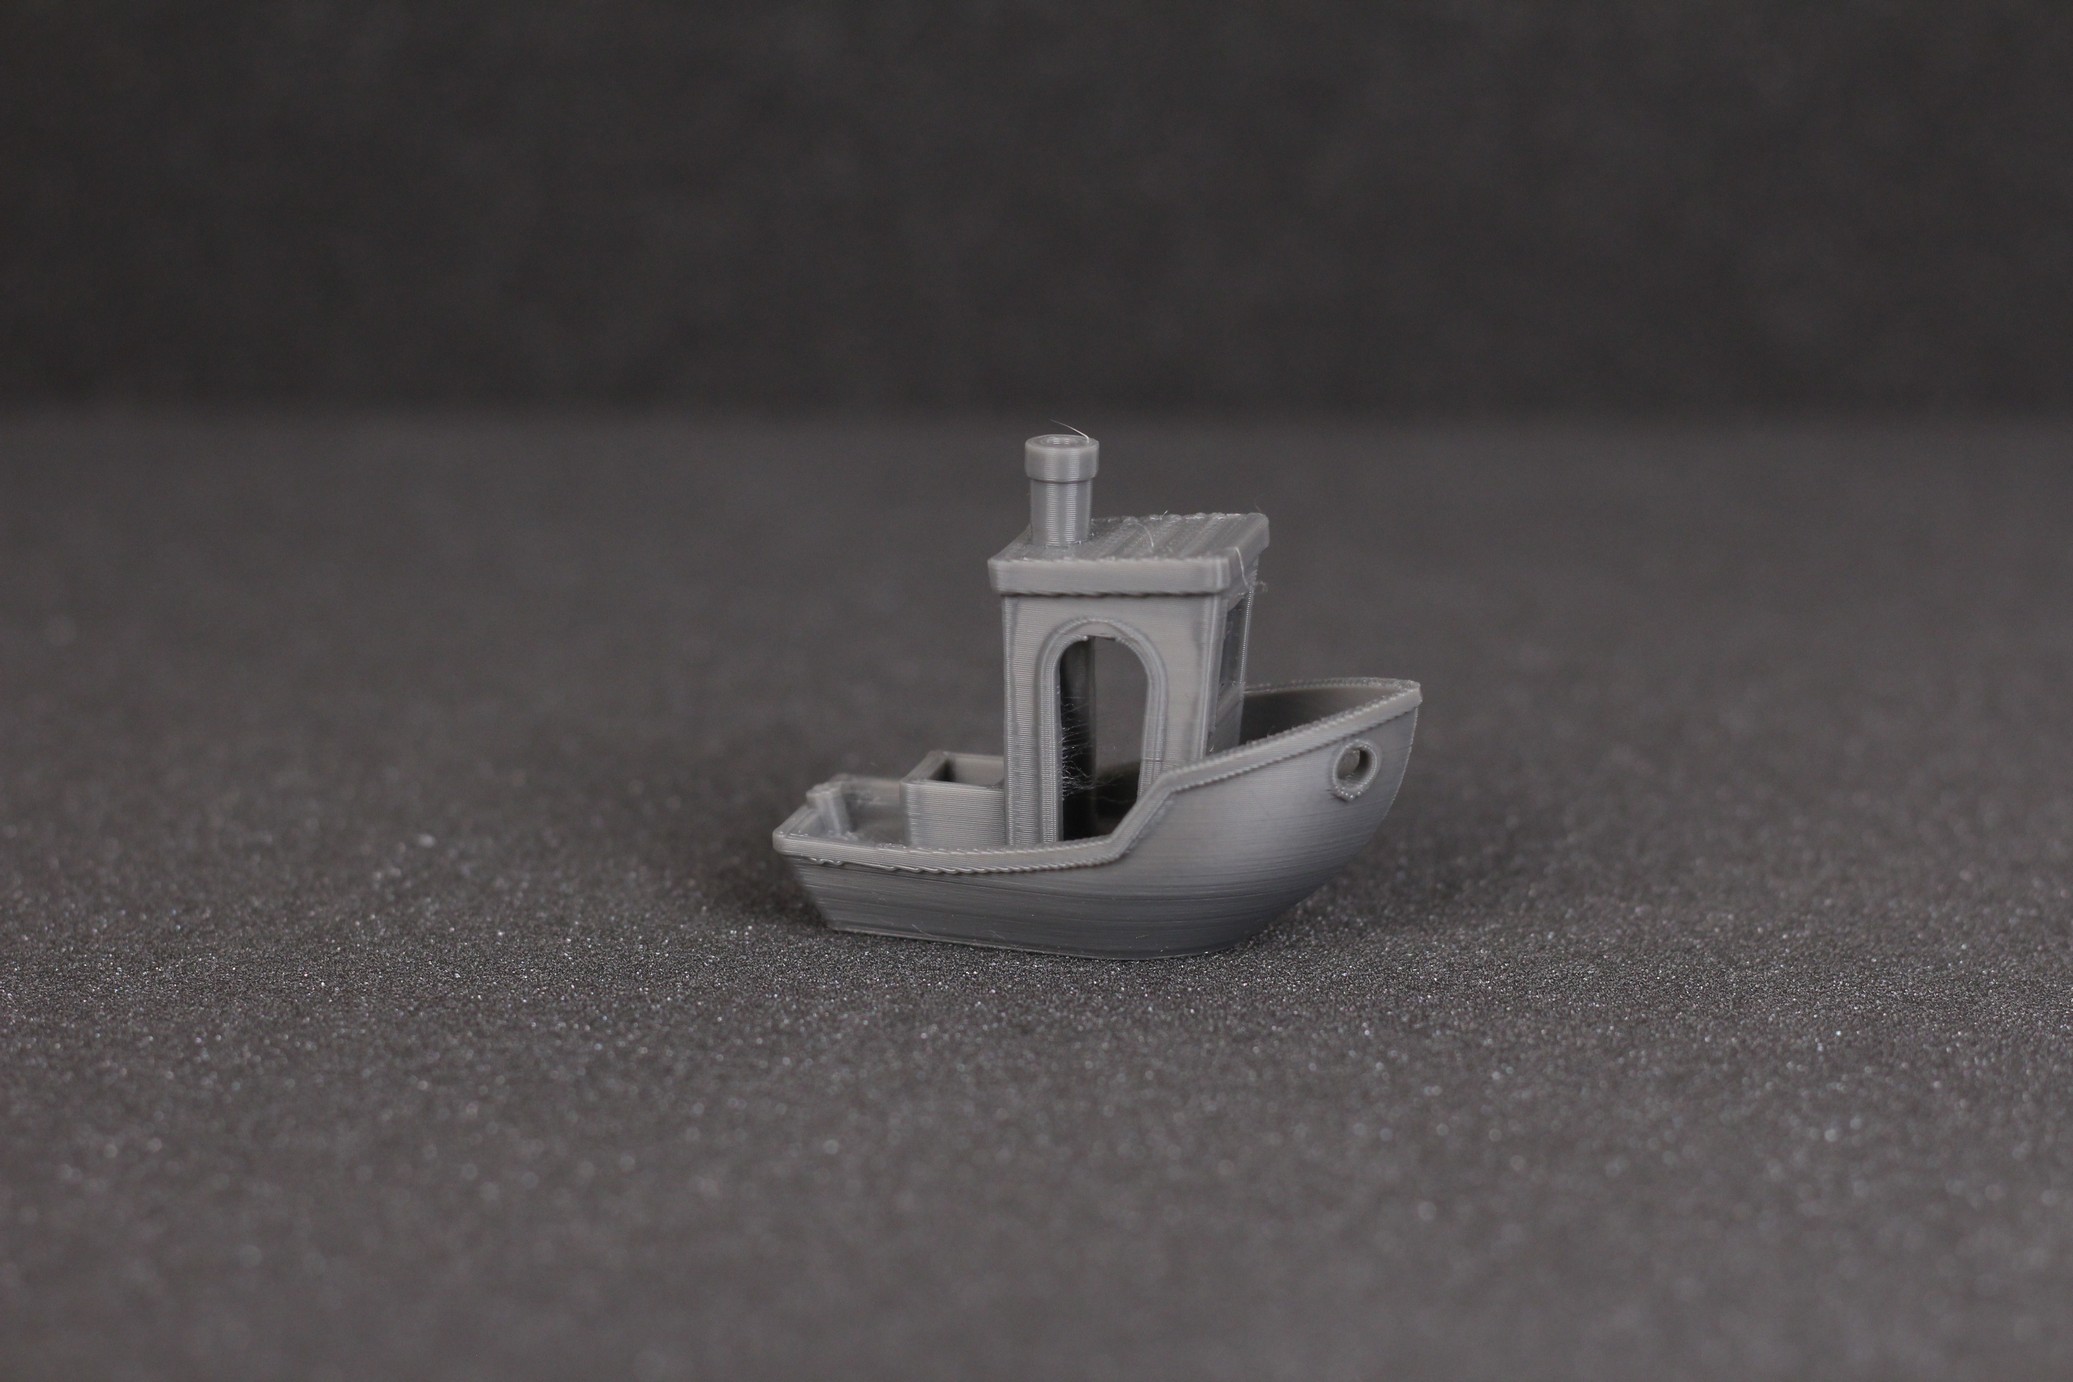 3D Benchy printed on the Ender 3 S1 2 | Creality Ender 3 S1 Review: Almost Perfect